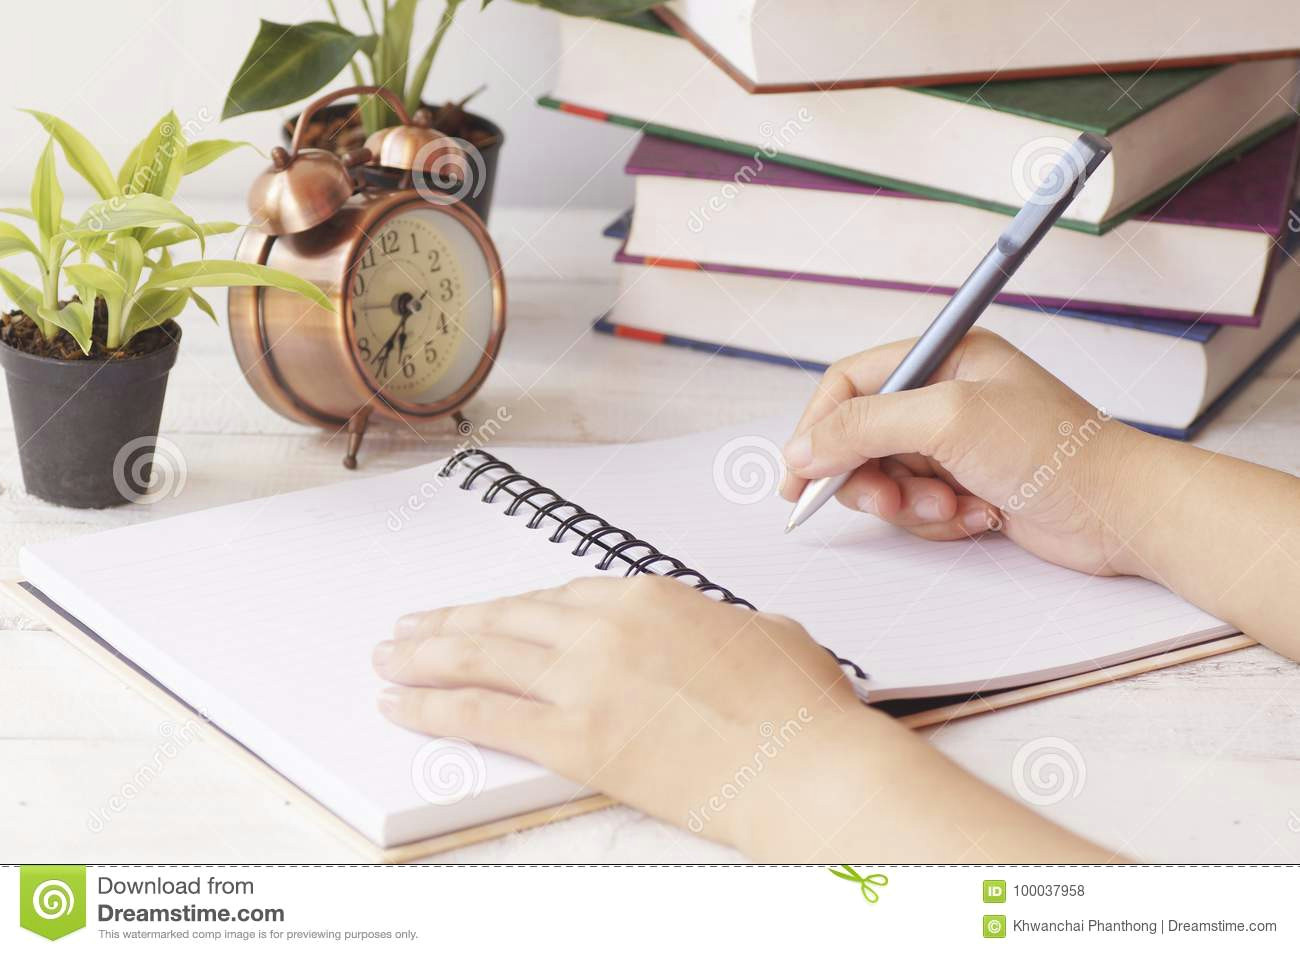 hand writing on notebook on table